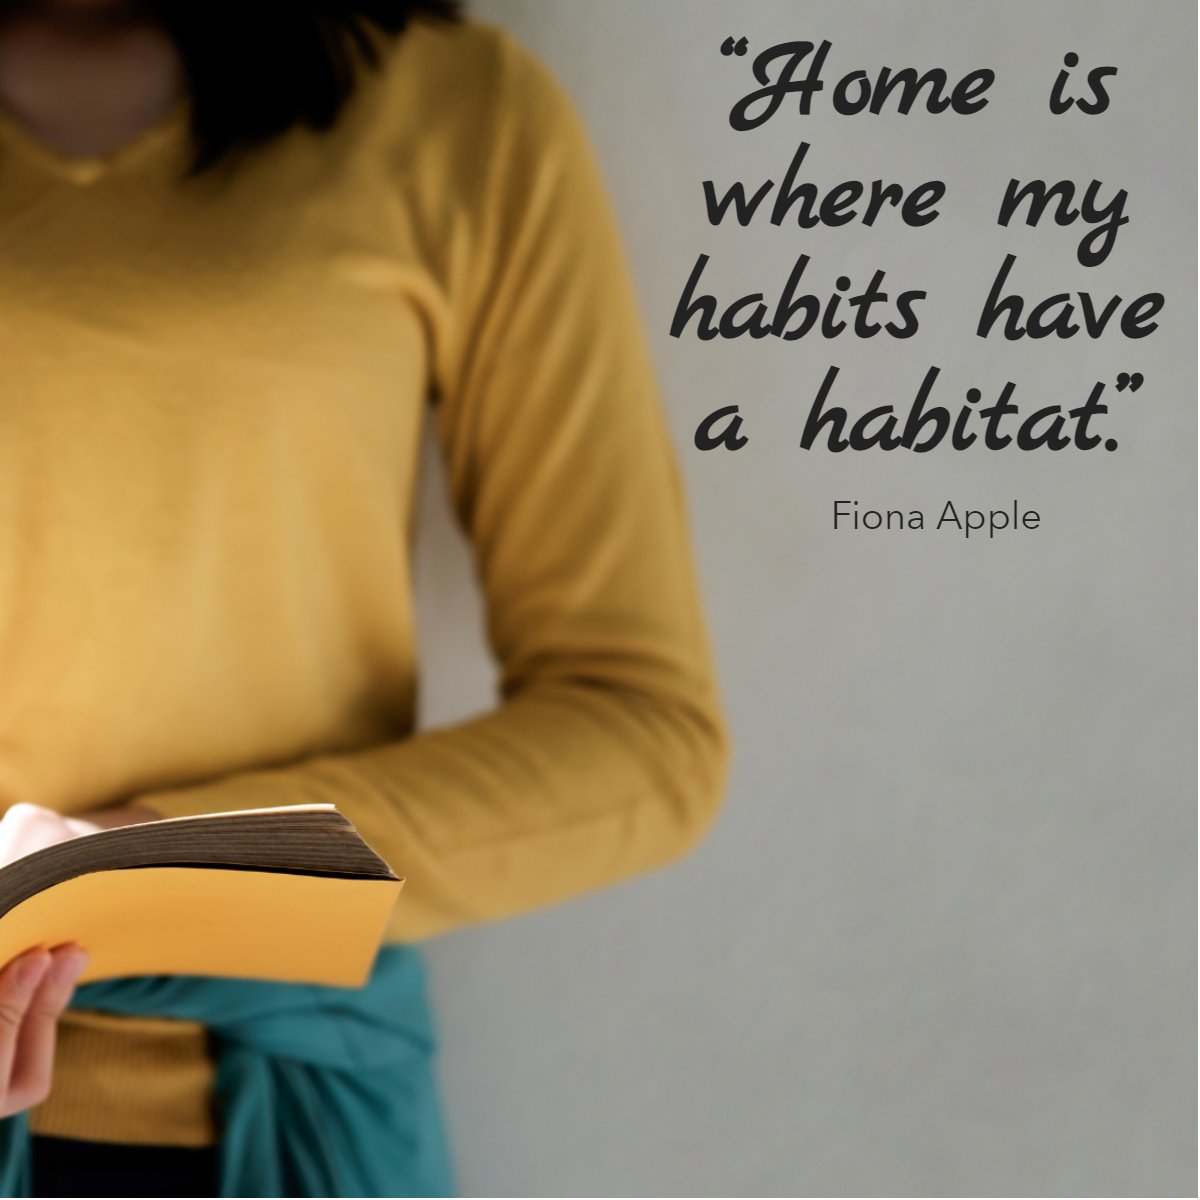 'Home is where my habits have a habitat.' 
― Fiona Apple 📖

#habits #realestate #realtor #buy #sell #homeowner #fun #inspiring #quoteoftheday #fionaapple
 #AmericasMortgageSolutions #christianpenner #onestopbrokershop #mortgagebrokerwestpalmbeach